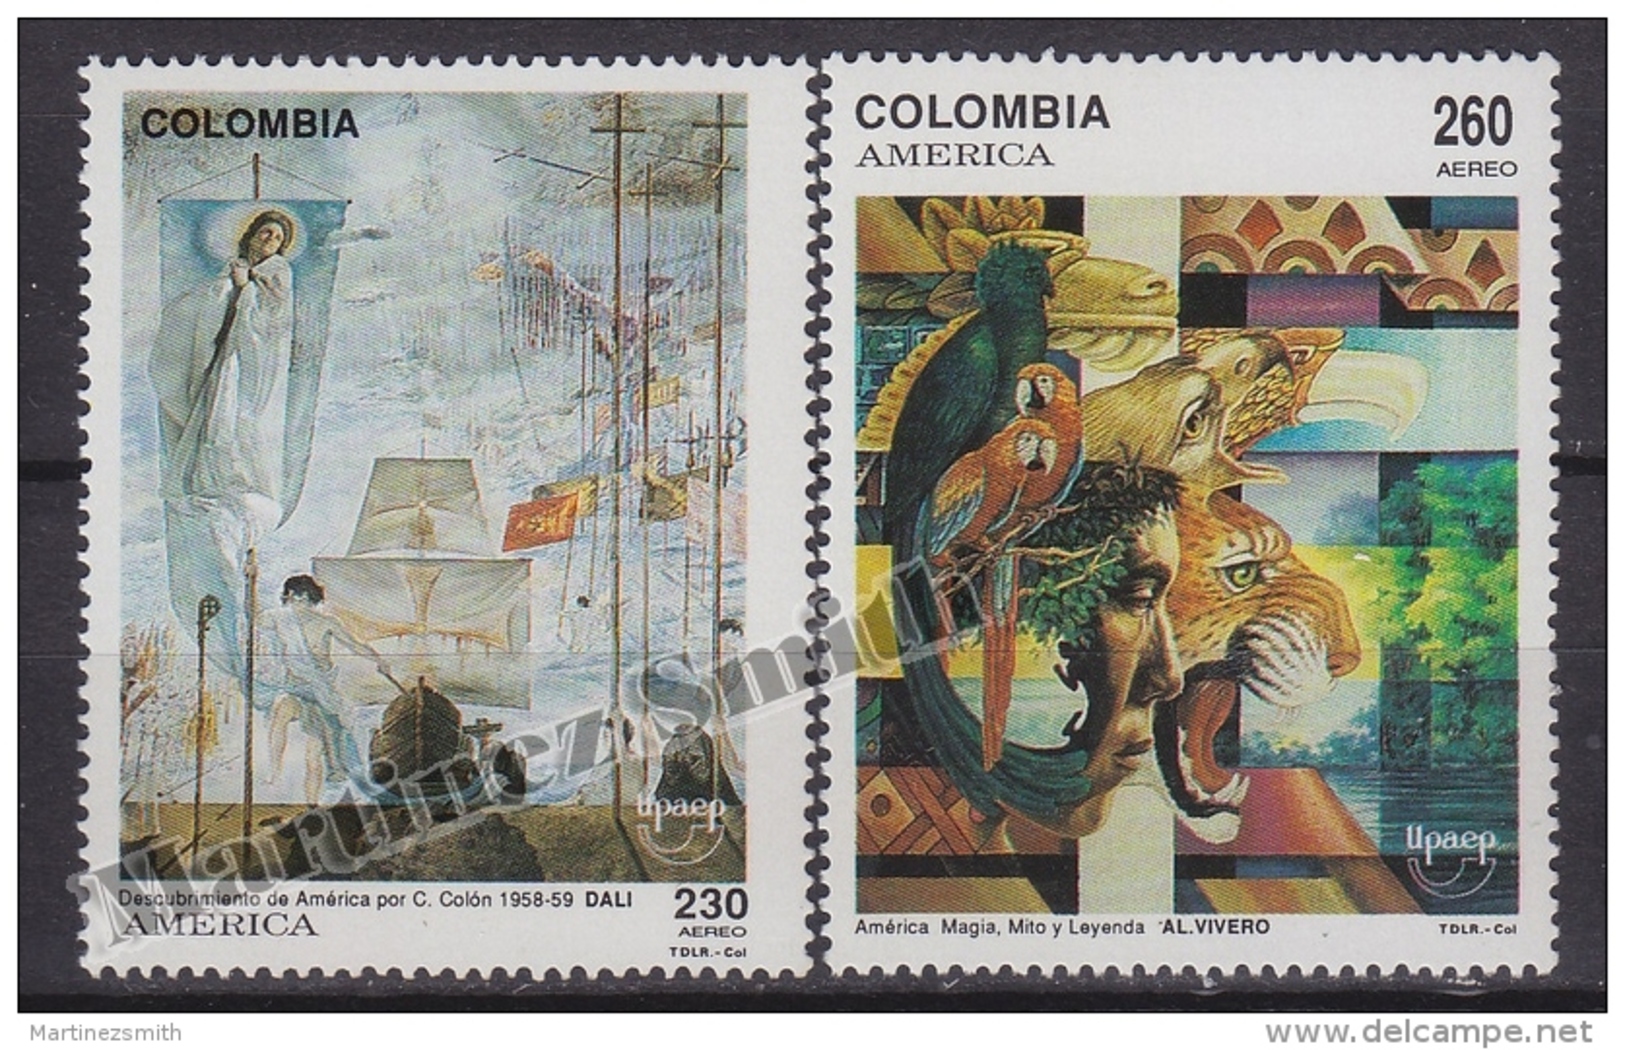 Colombia 1992 Yvert A 851- 52, America UPAEP - Air Mail - MNH - Colombie